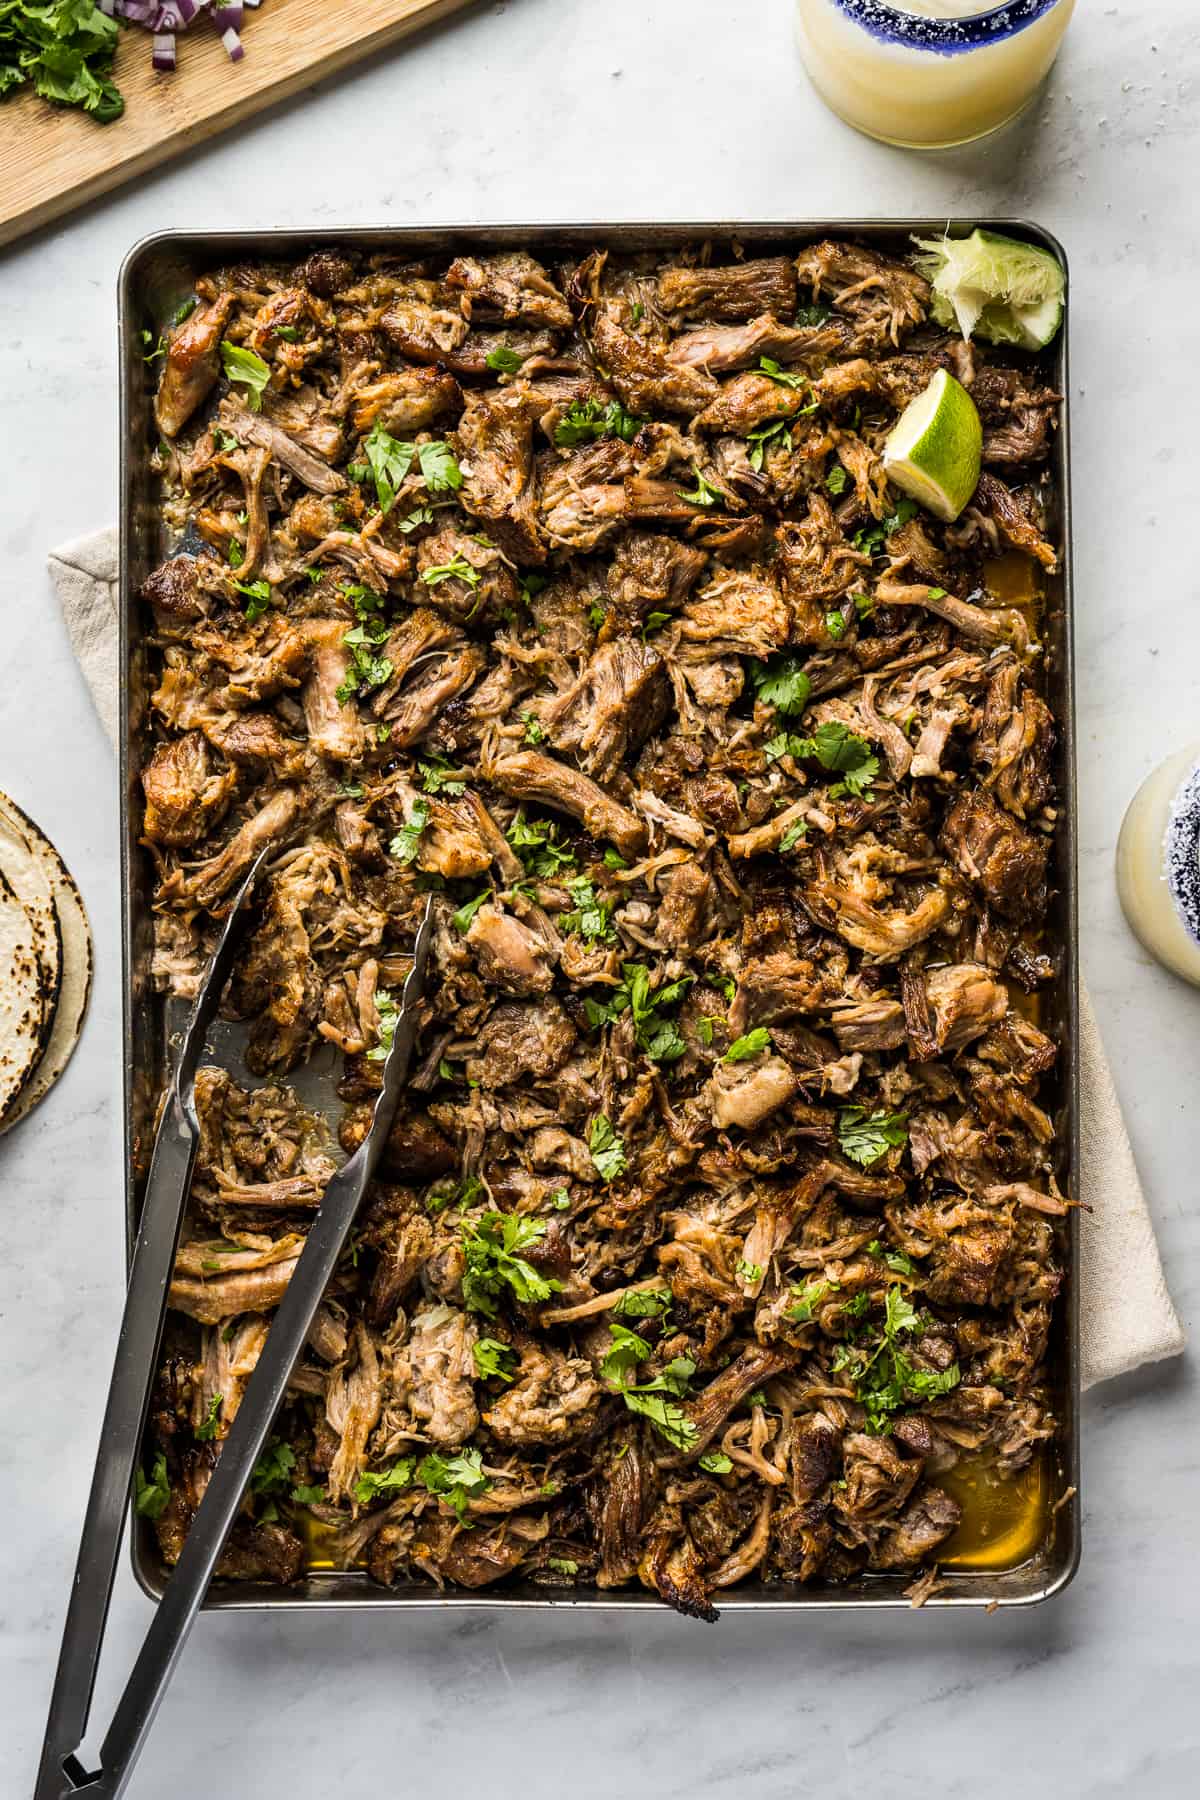 Authentic Carnitas on a sheet pan garnished with chopped cilantro.